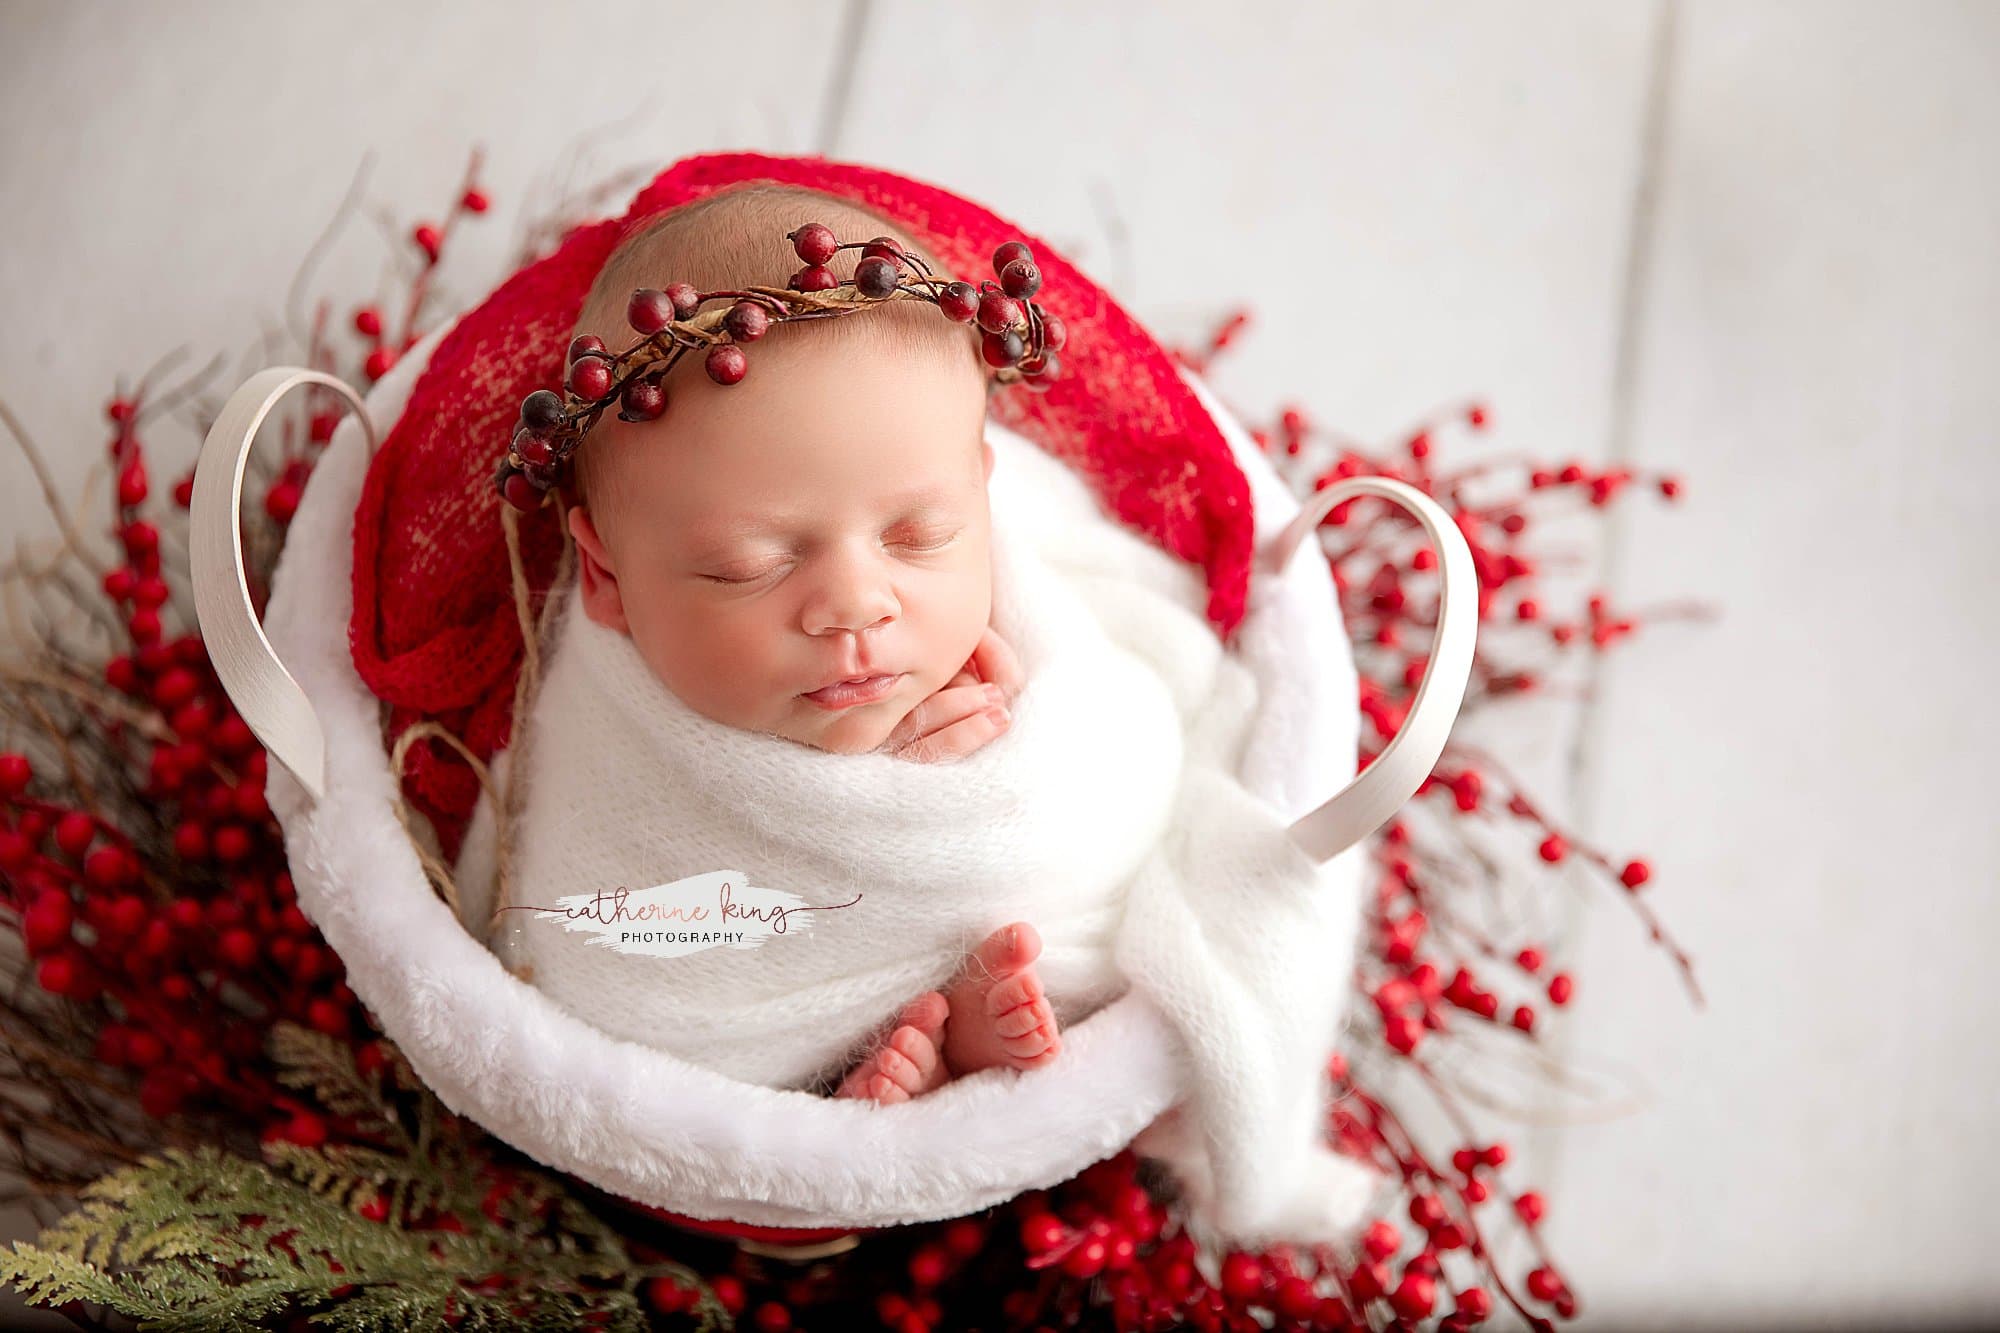 Adding a little holiday spirit to newborn sessions